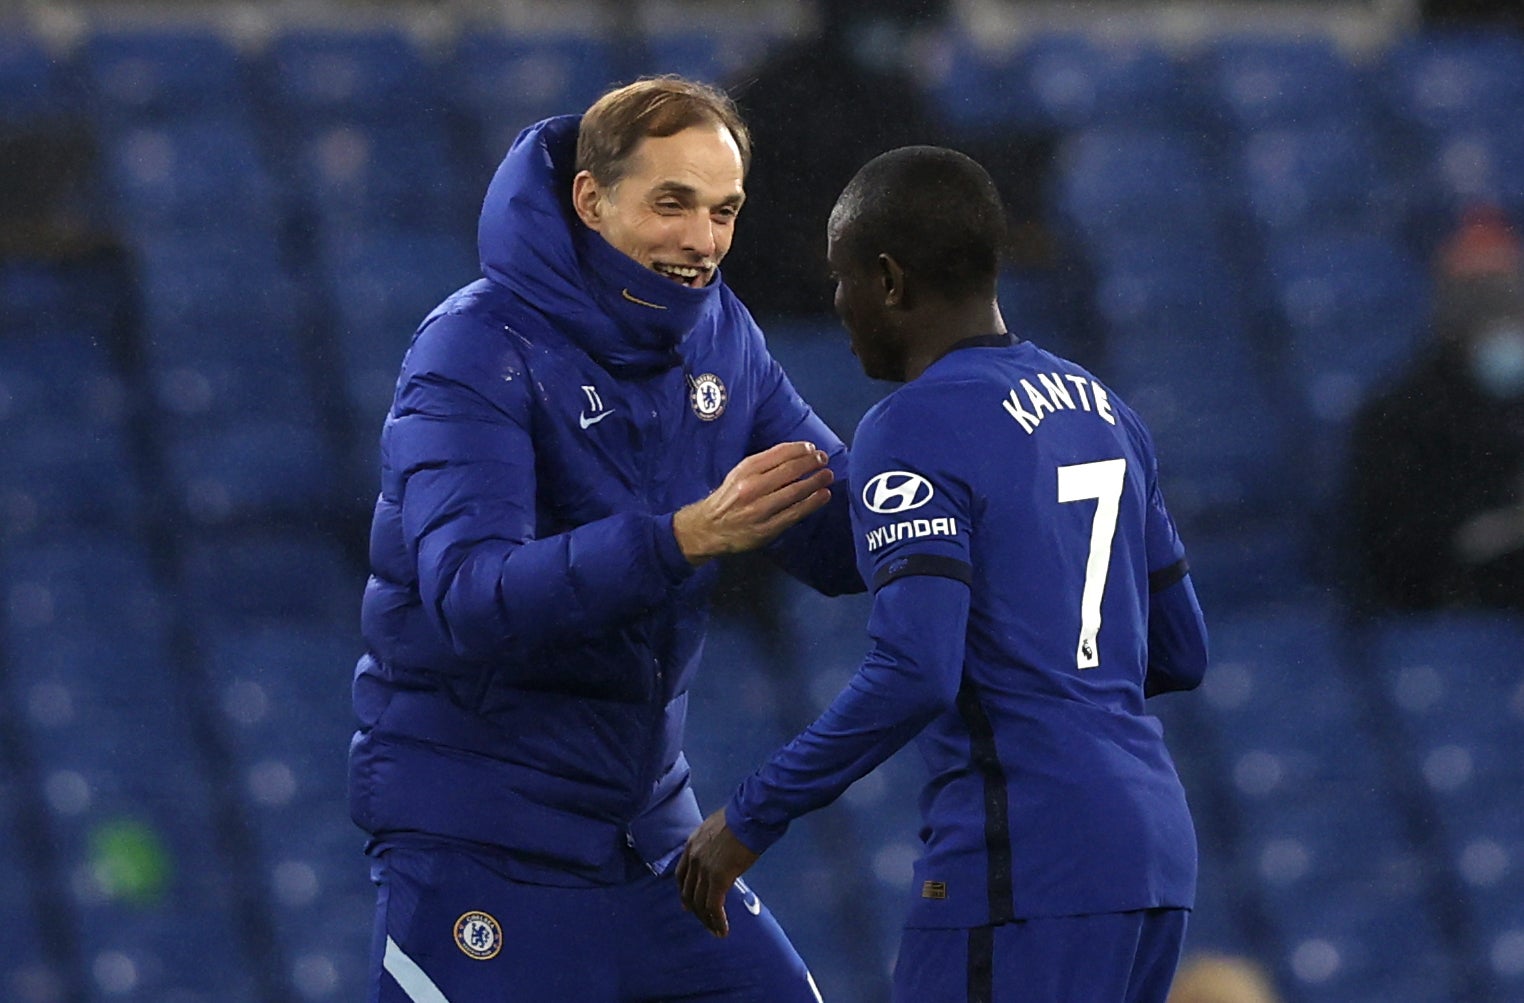 Thomas Tuchel, left, has great admiration for N’Golo Kante, right